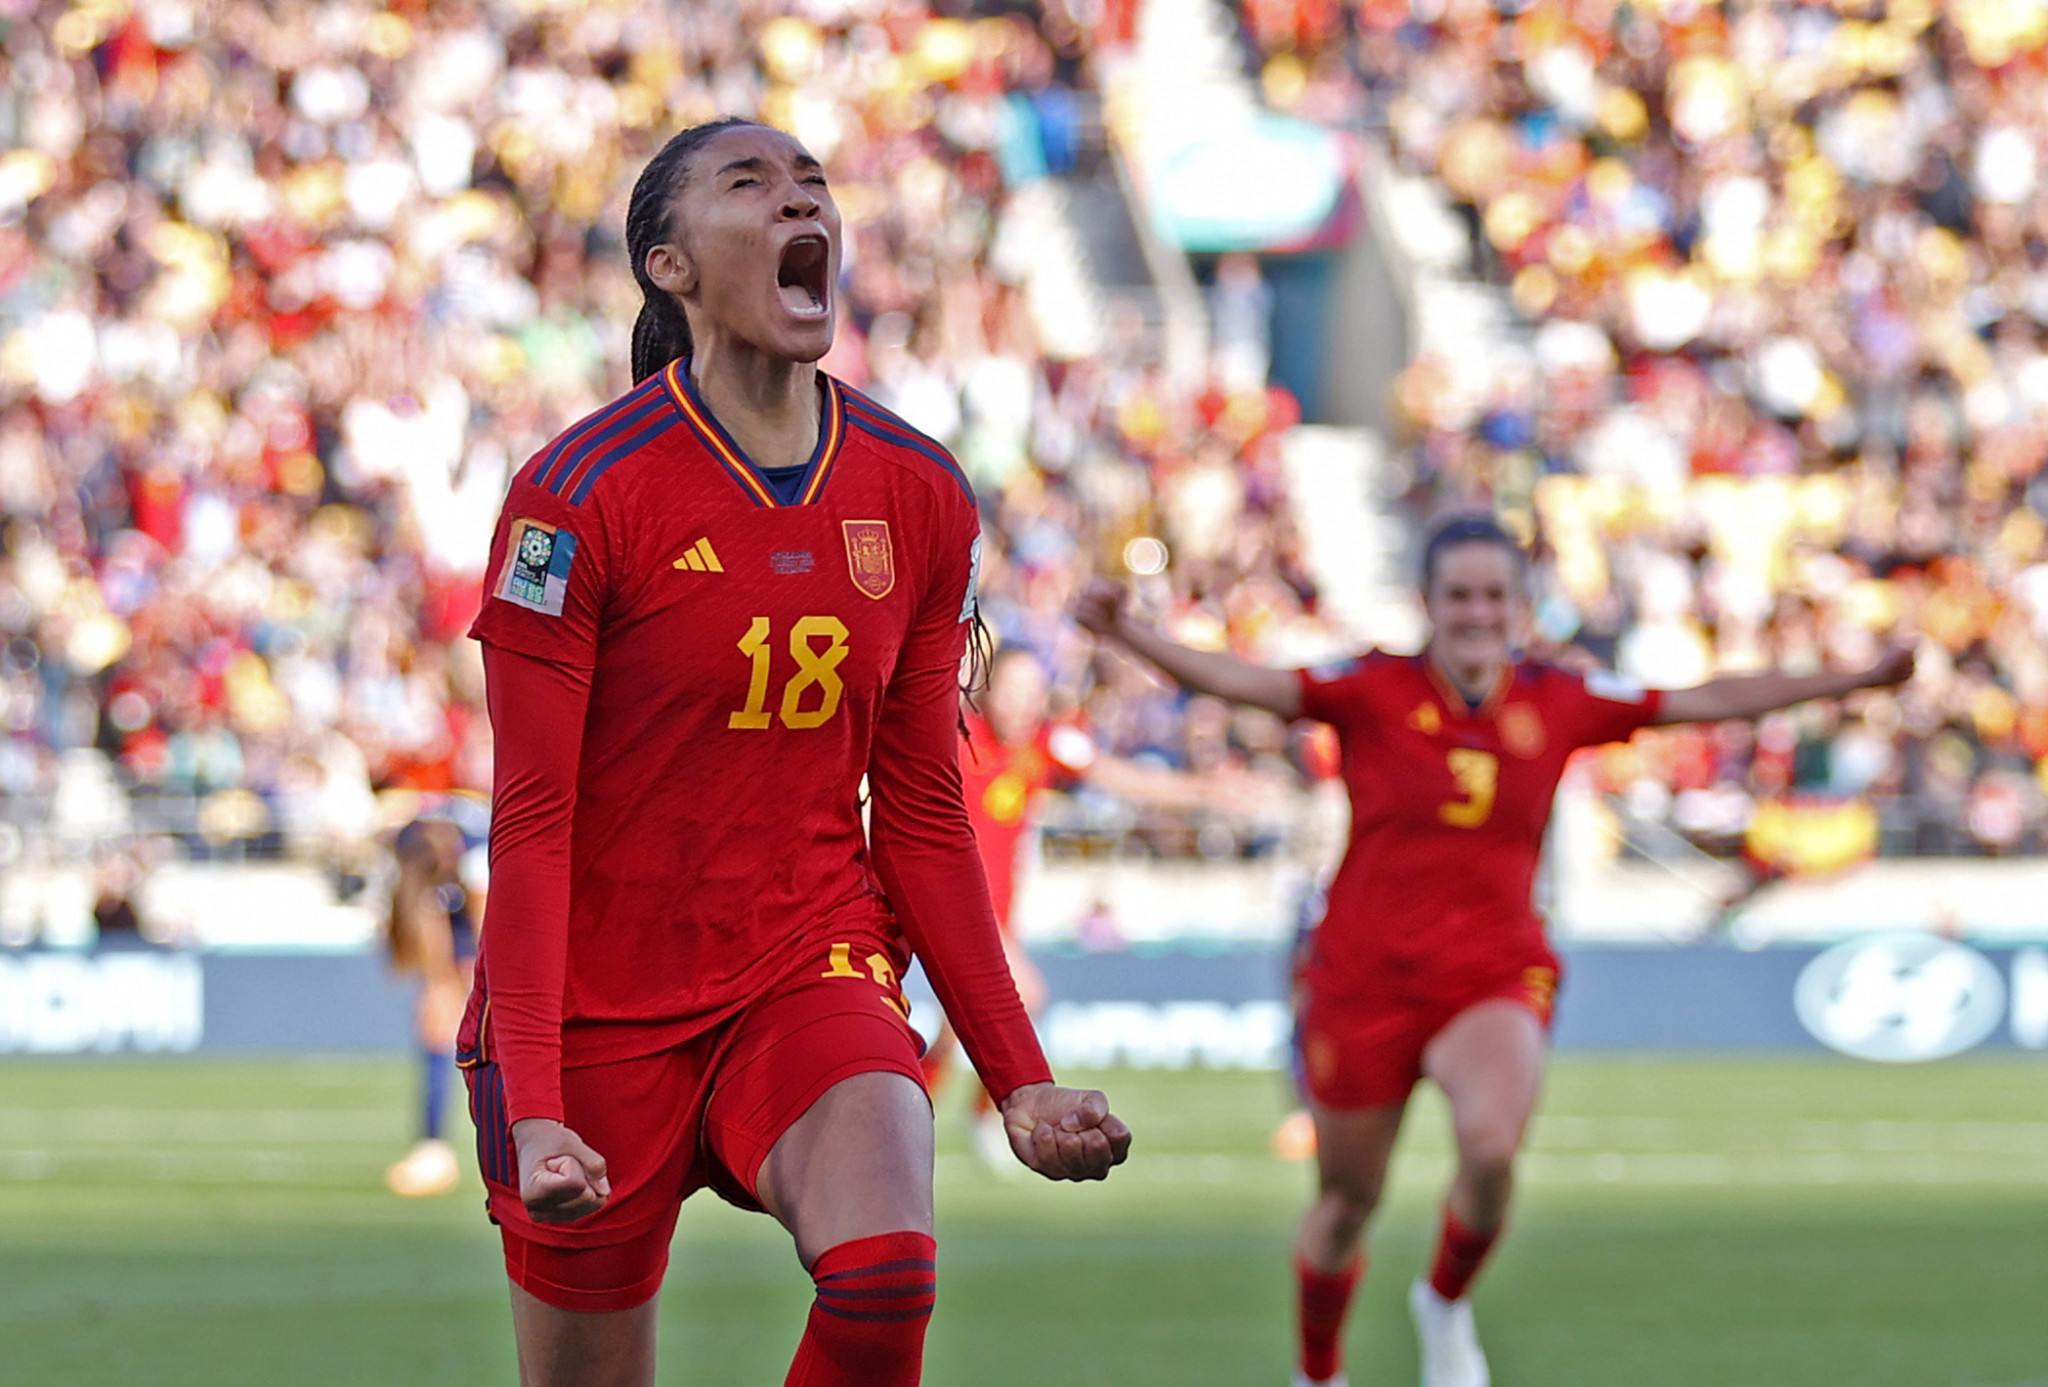 Spain reach Women's World Cup semi-finals for first time after downing Dutch